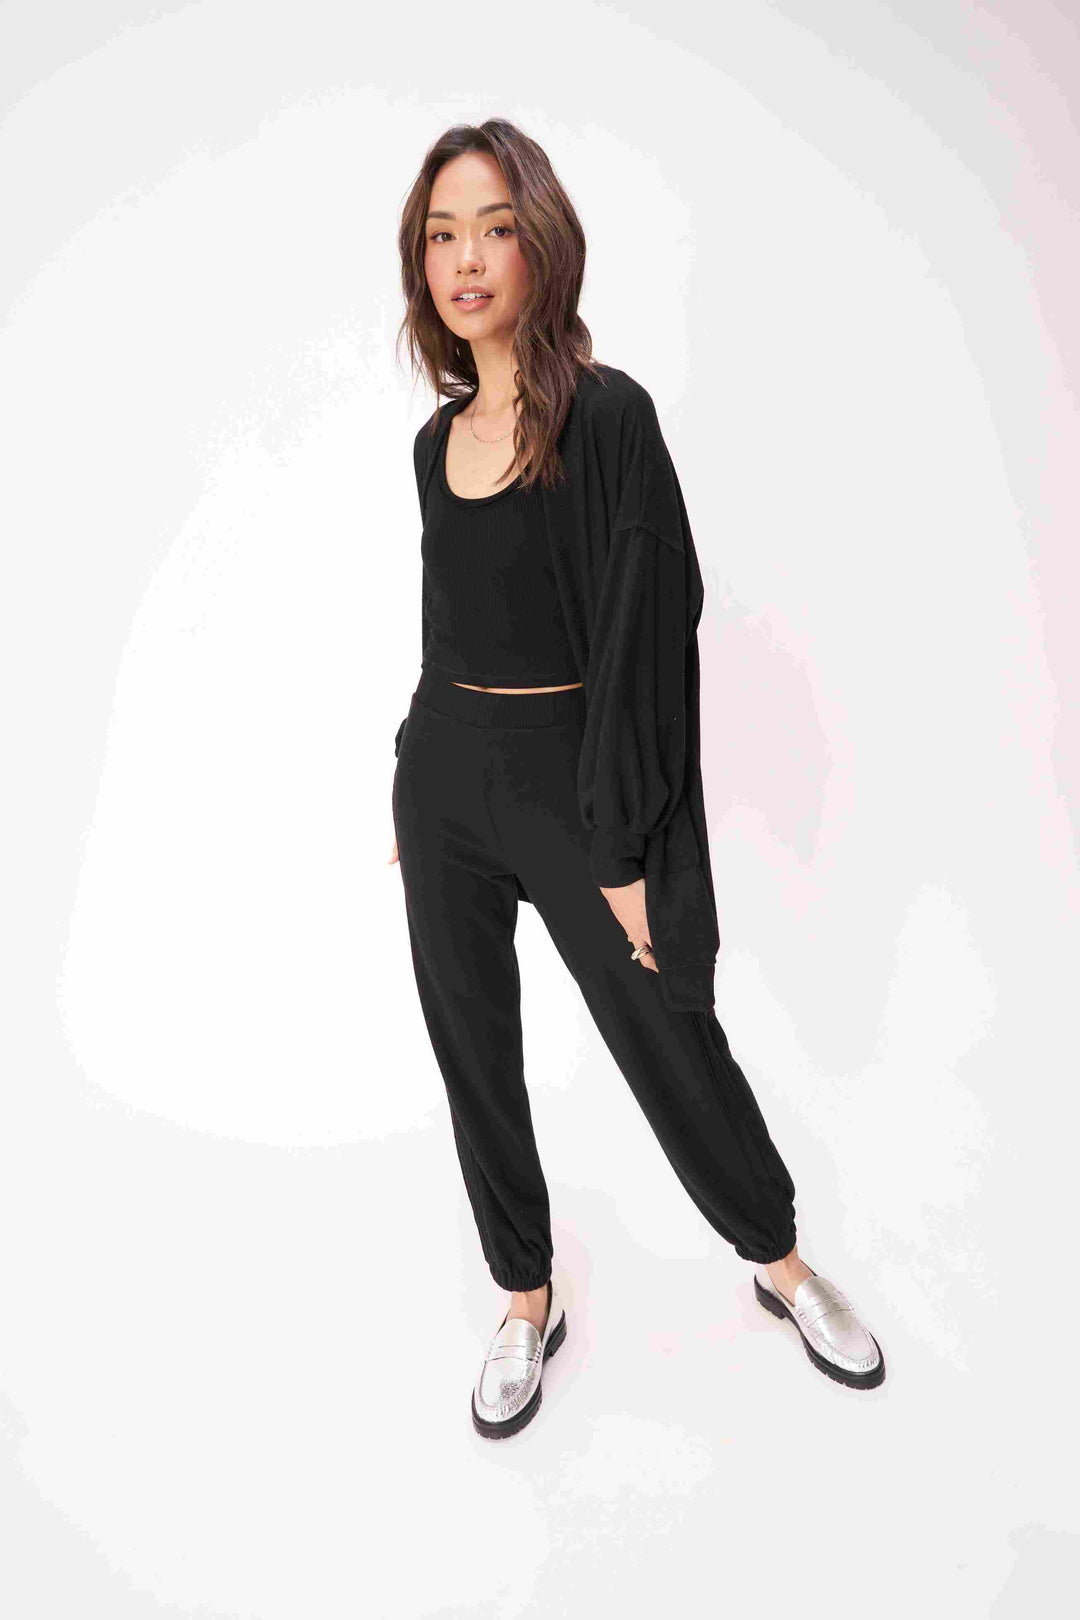 JUST RELAX COZY SEAMED JOGGER-BLACK - Kingfisher Road - Online Boutique